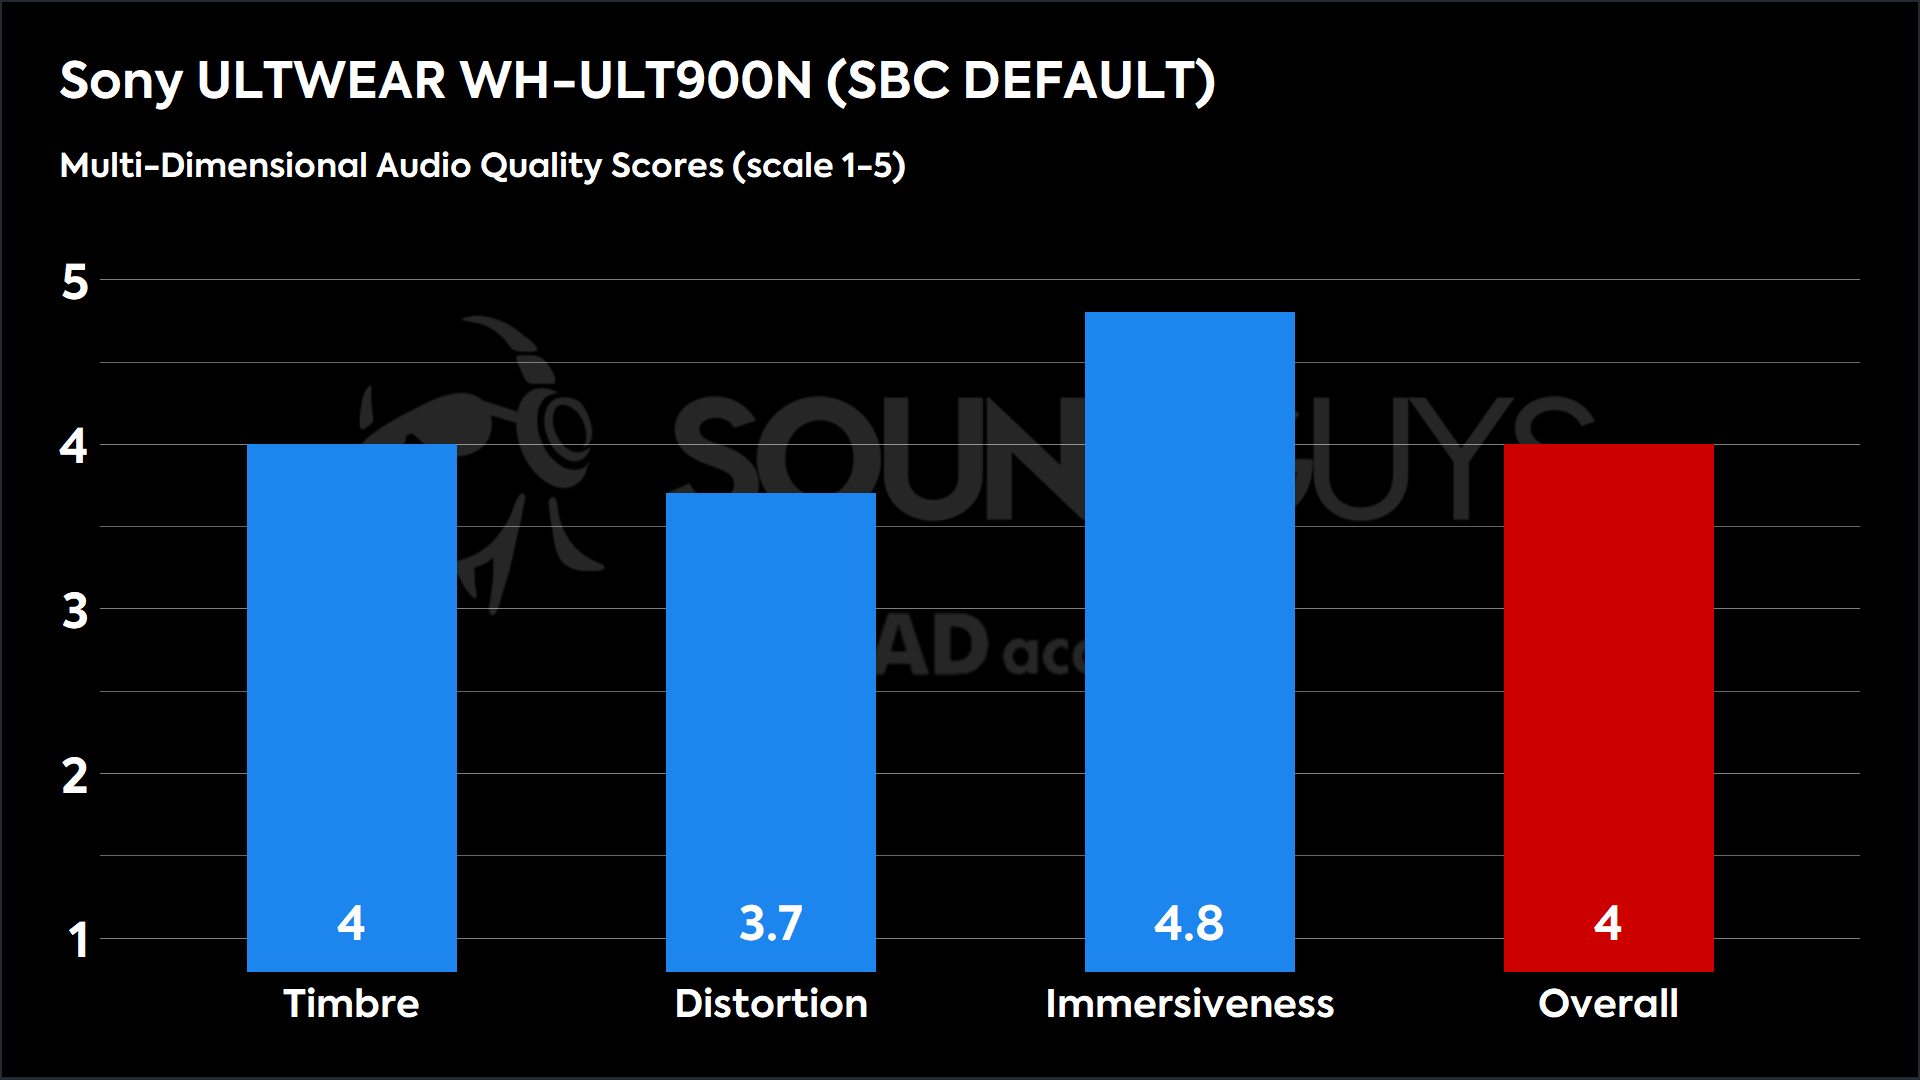 This chart shows the MDAQS results for the Sony ULTWEAR WH-ULT900N in SBC DEFAULT mode. The Timbre score is 4, The Distortion score is 3.7, the Immersiveness score is 4.8, and the Overall Score is 4).